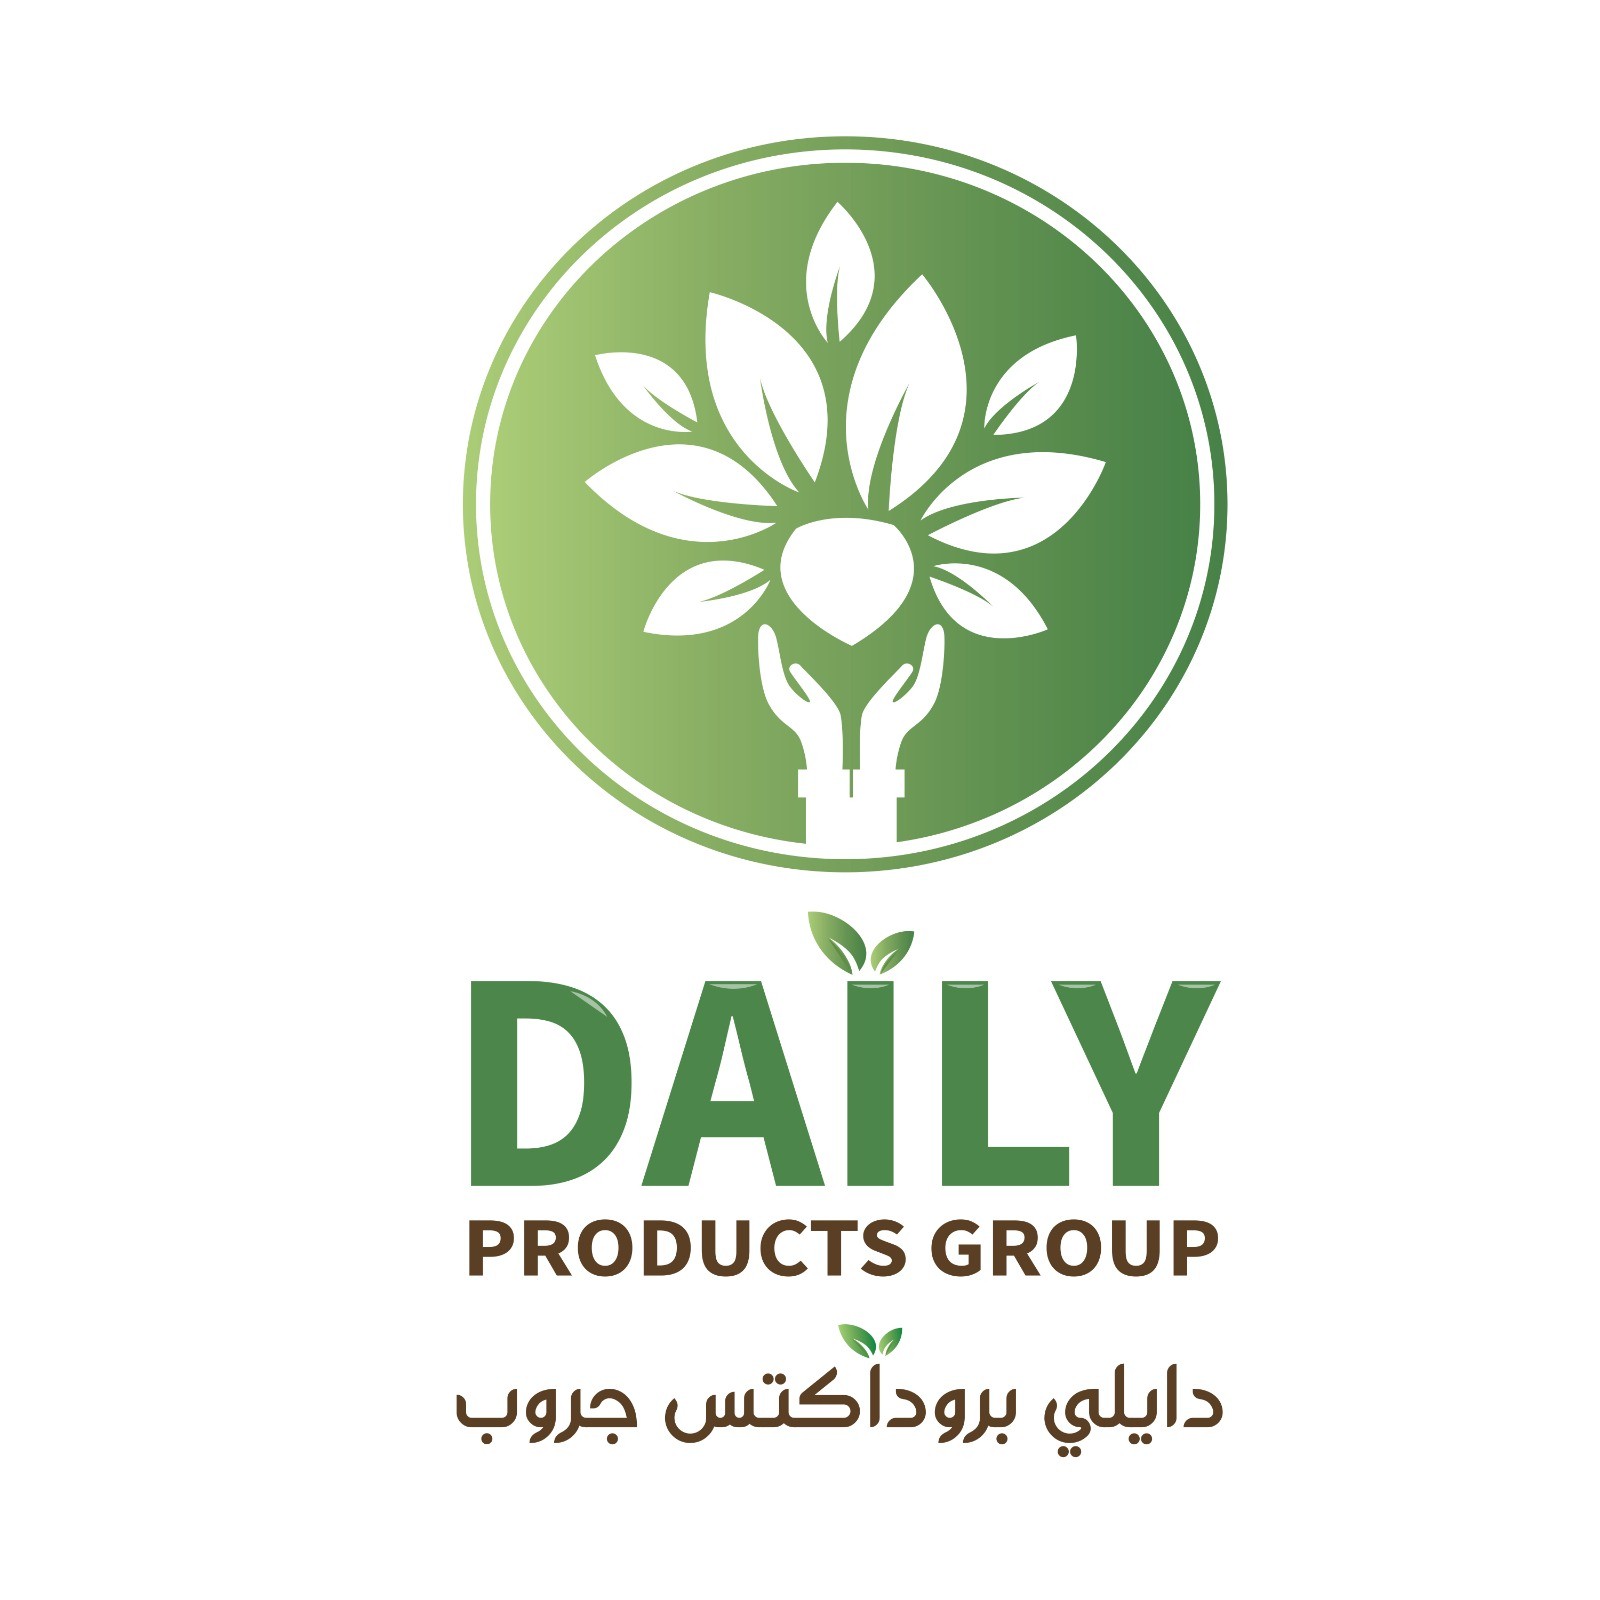 DAILY PRODUCTS GROUP FOR TRADING AND FOOD INDUSTRIES